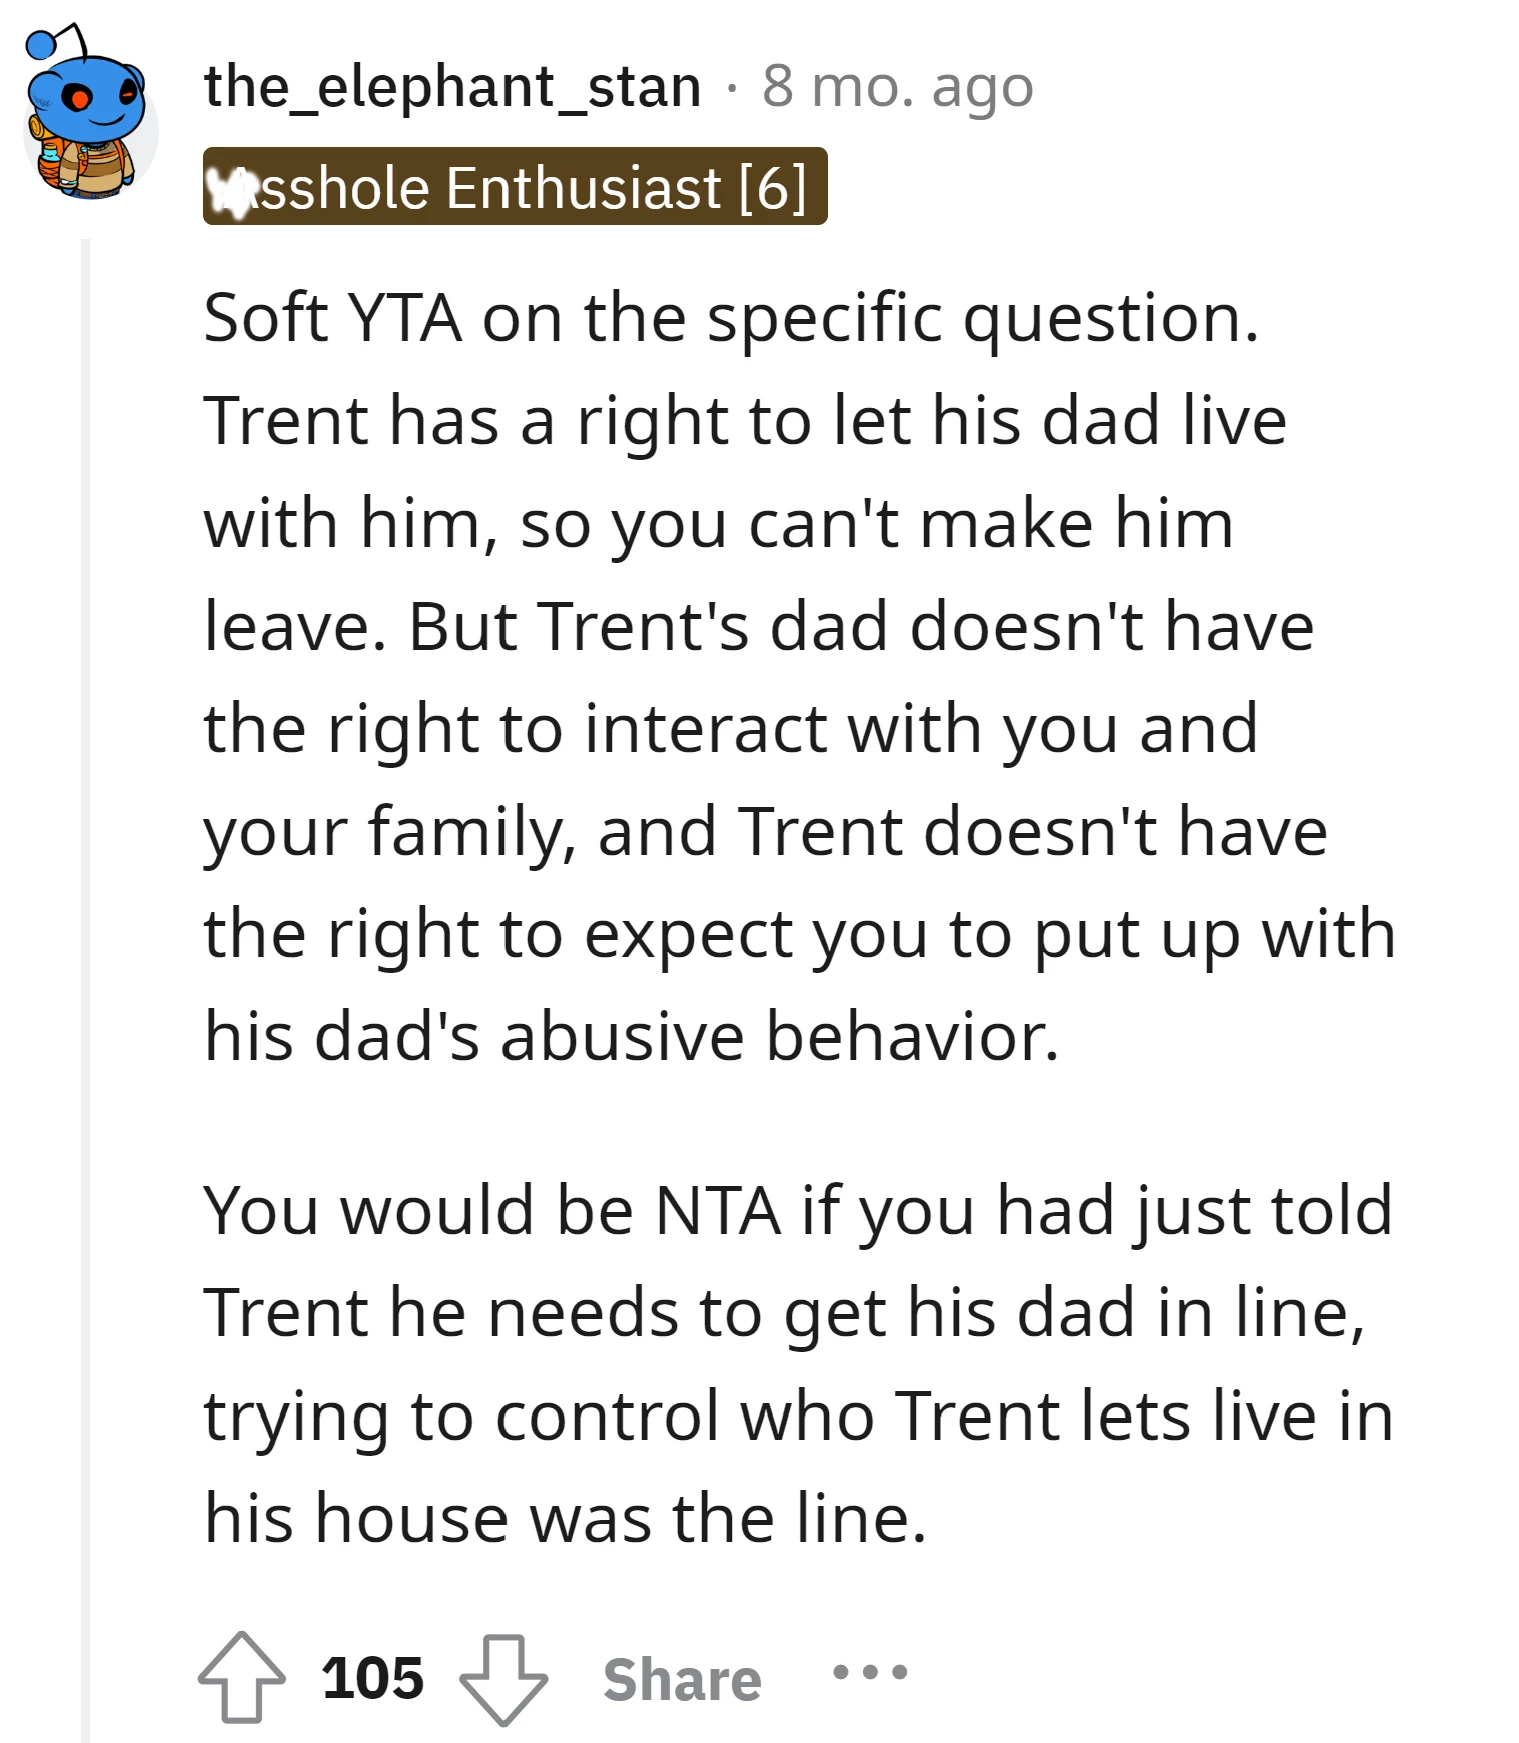 It's Trents Dad But It Seems He Crossed So Many Lines